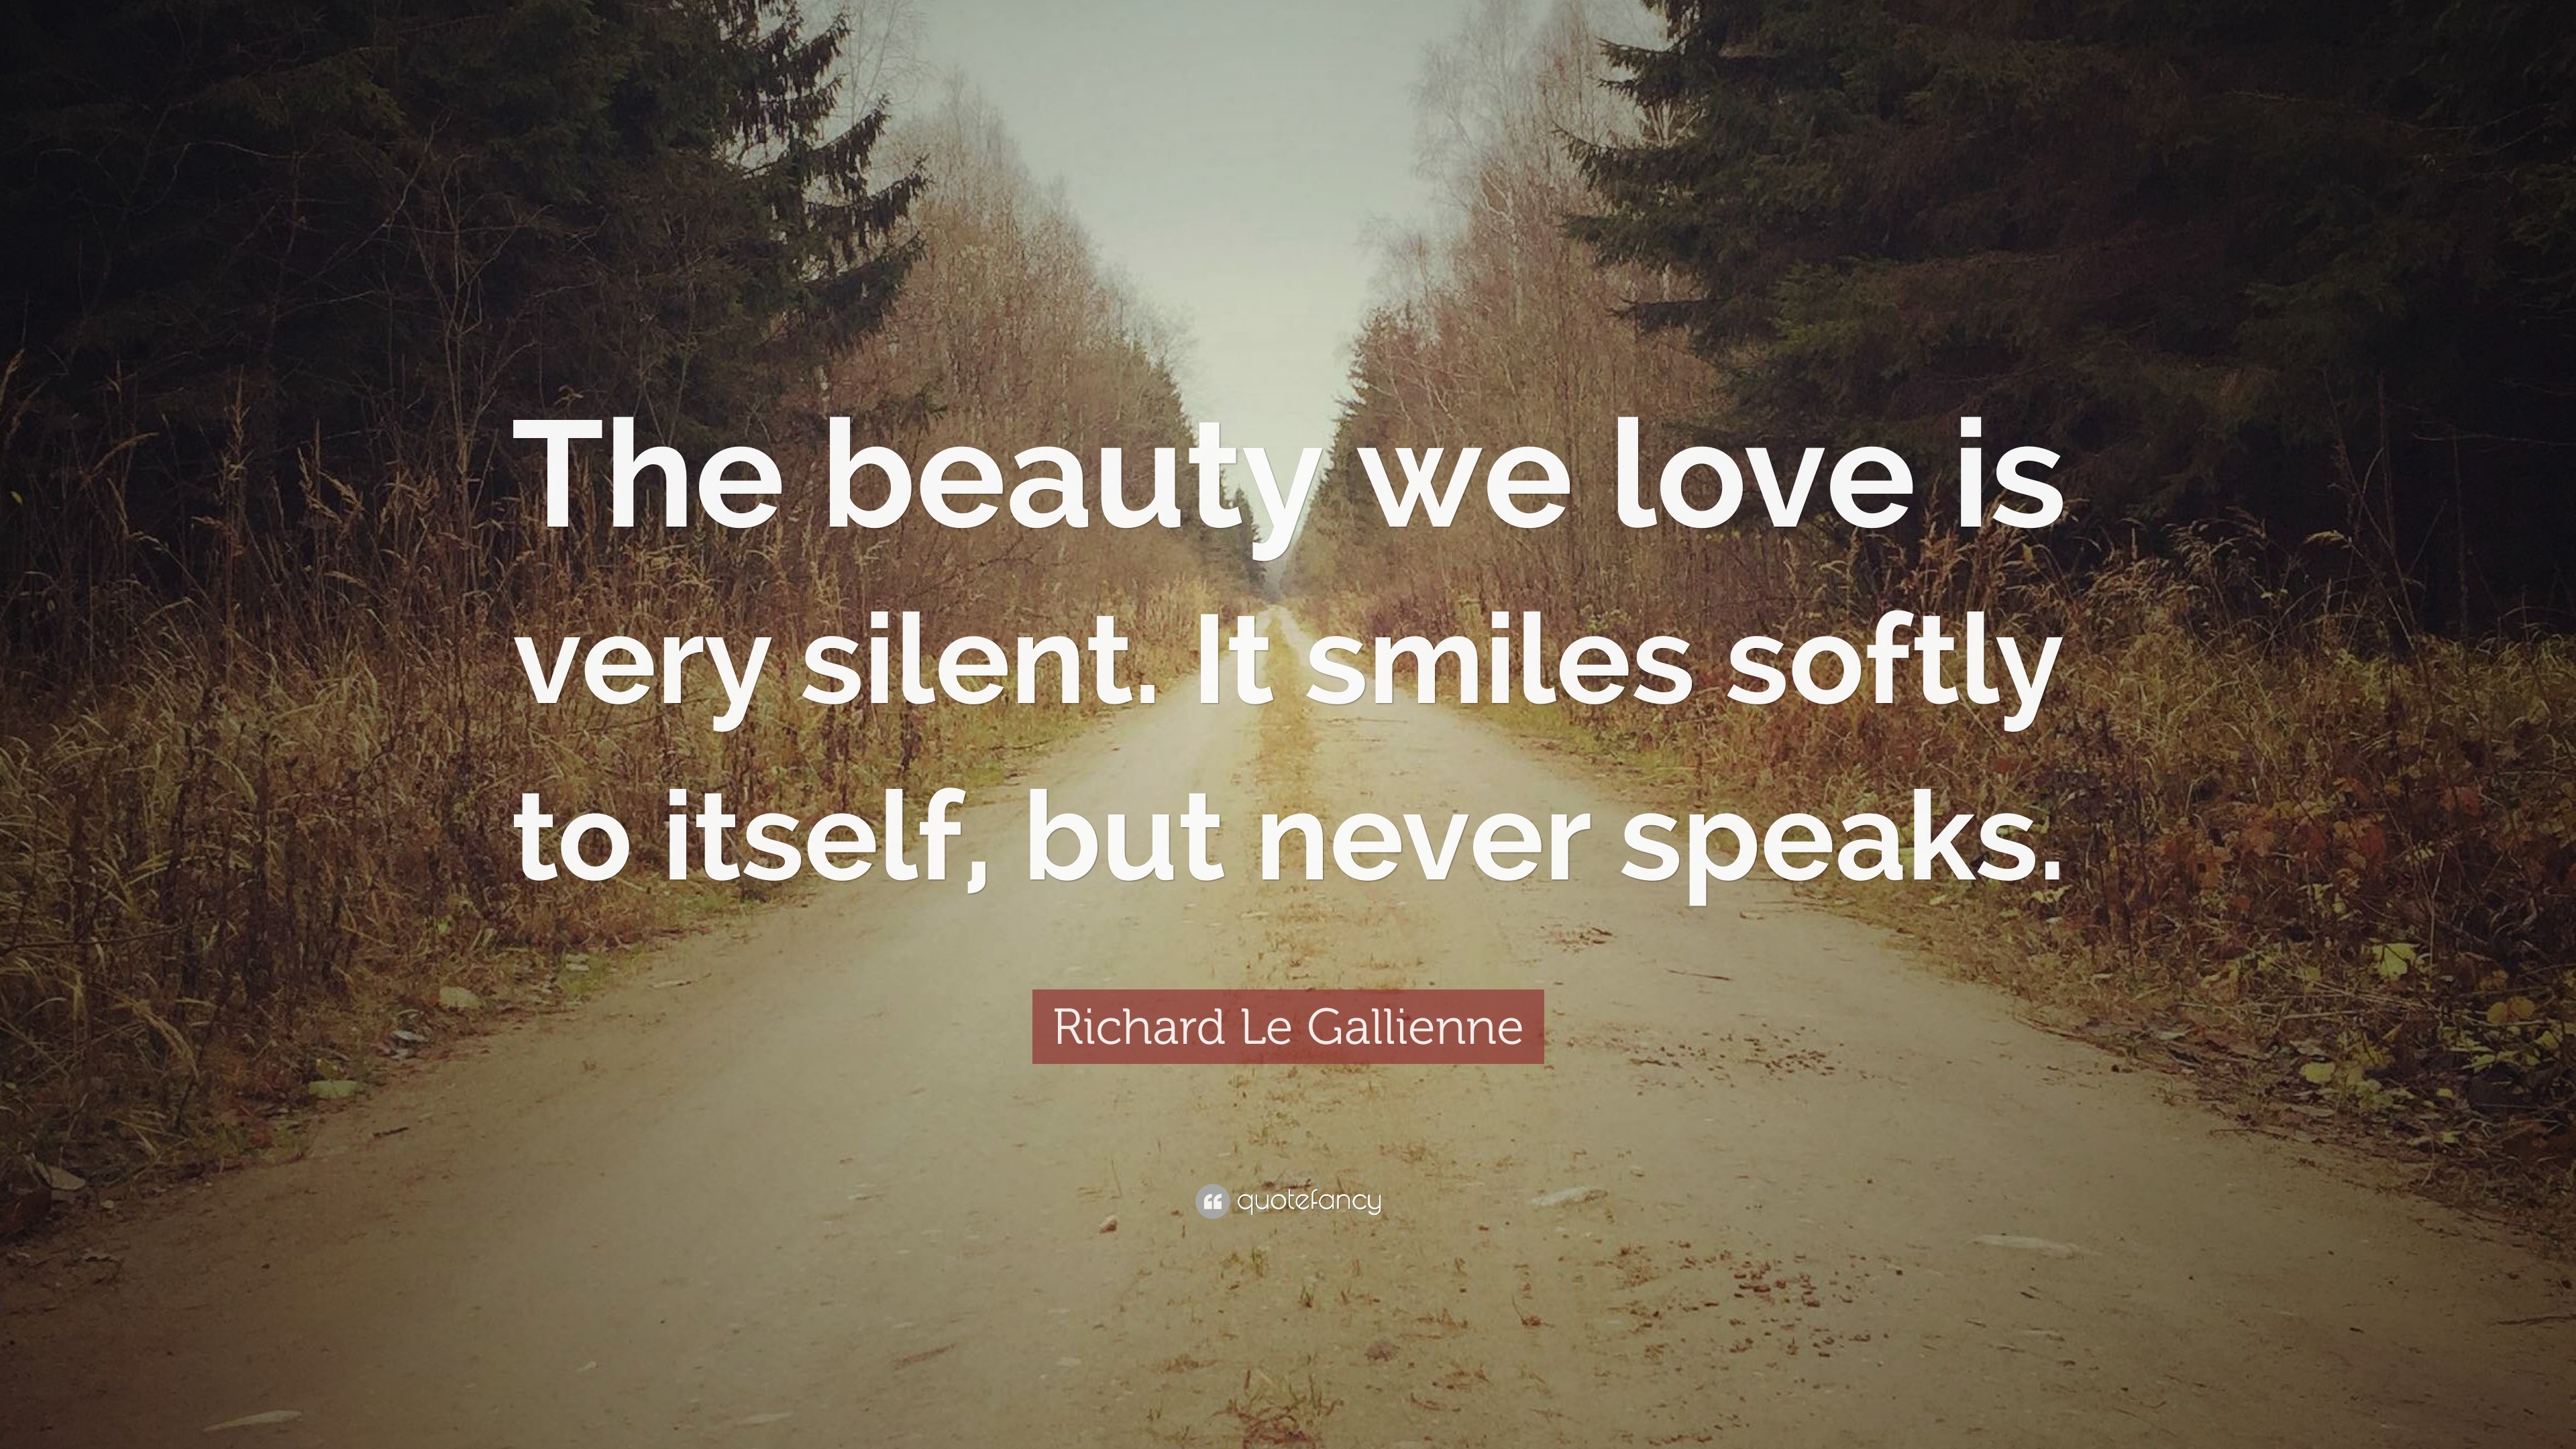 Richard Le Gallienne Quote “The beauty we love is very silent It smiles